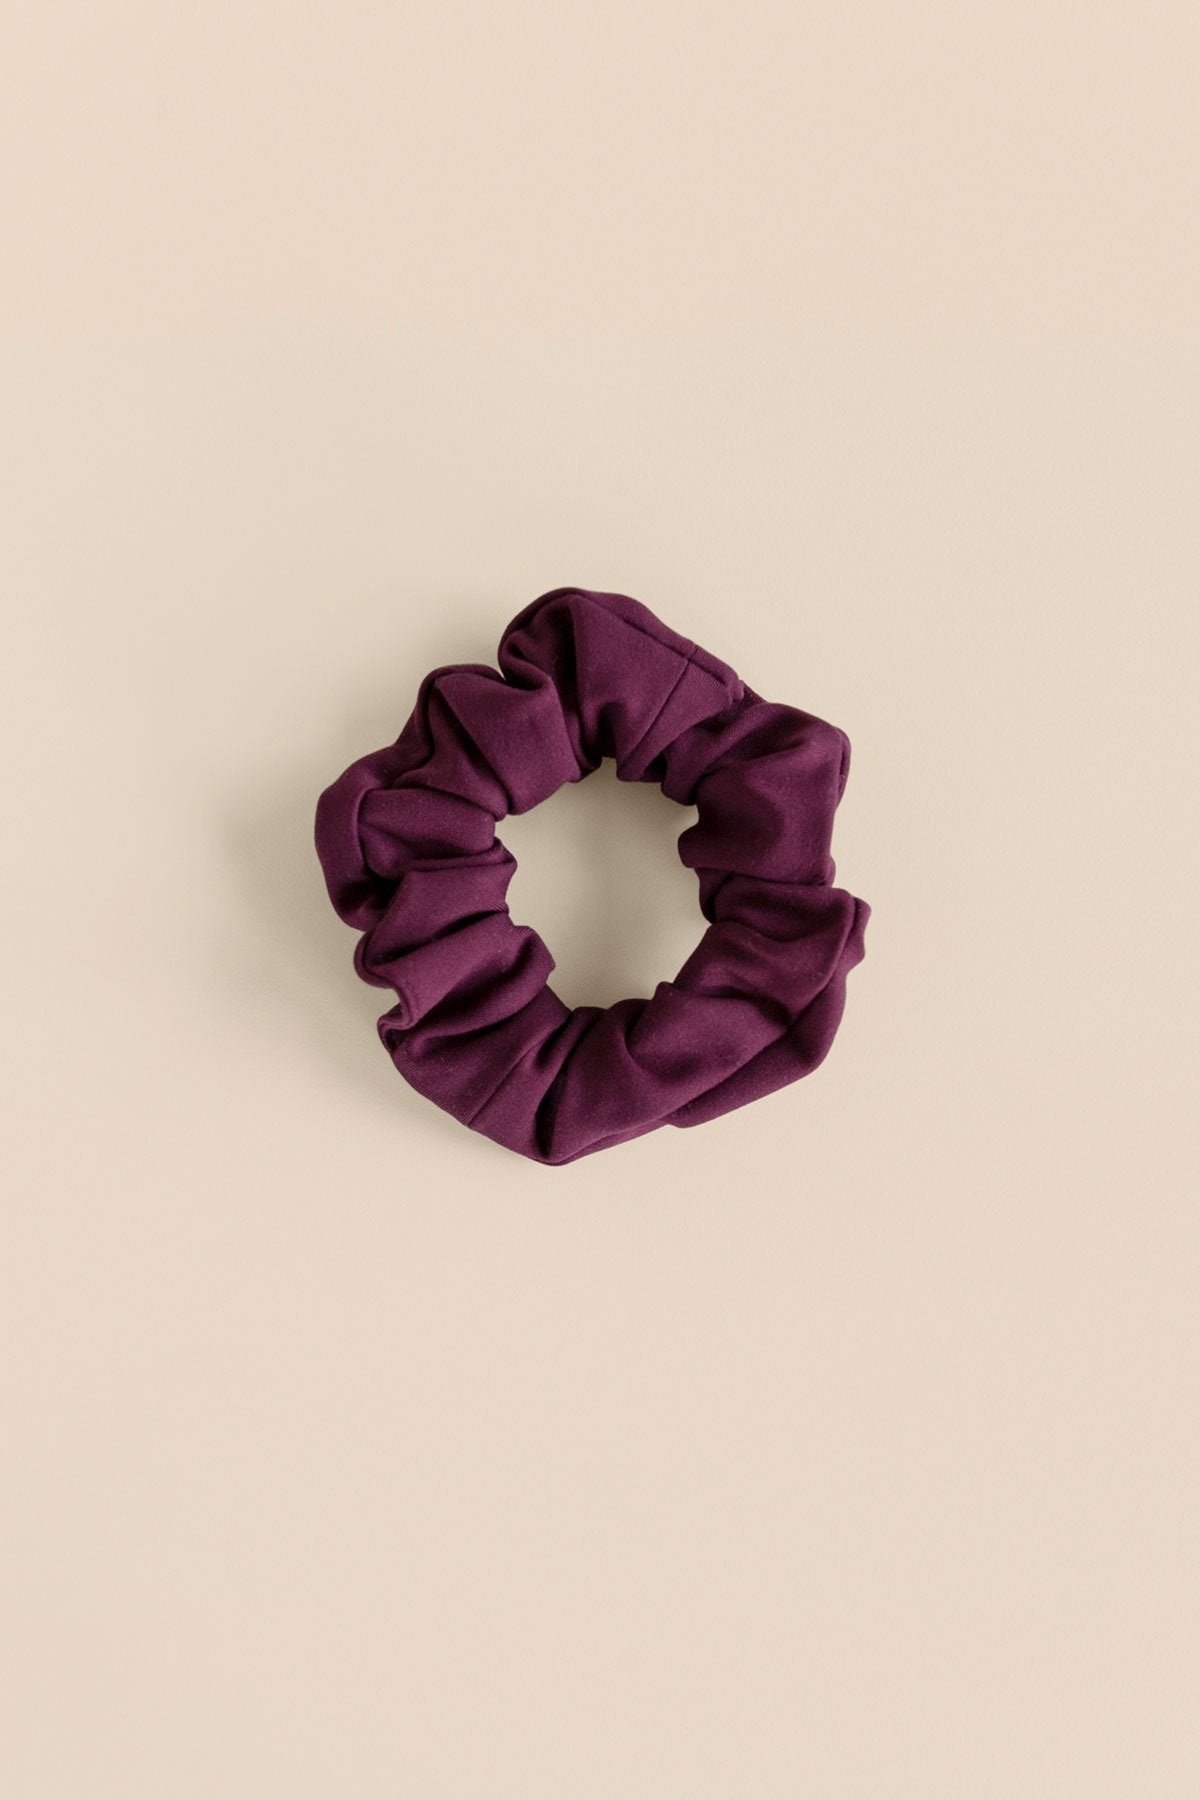 Girlfriend Collective The Scrunchie - Made from Recycled Water Bottles Plum Headwear